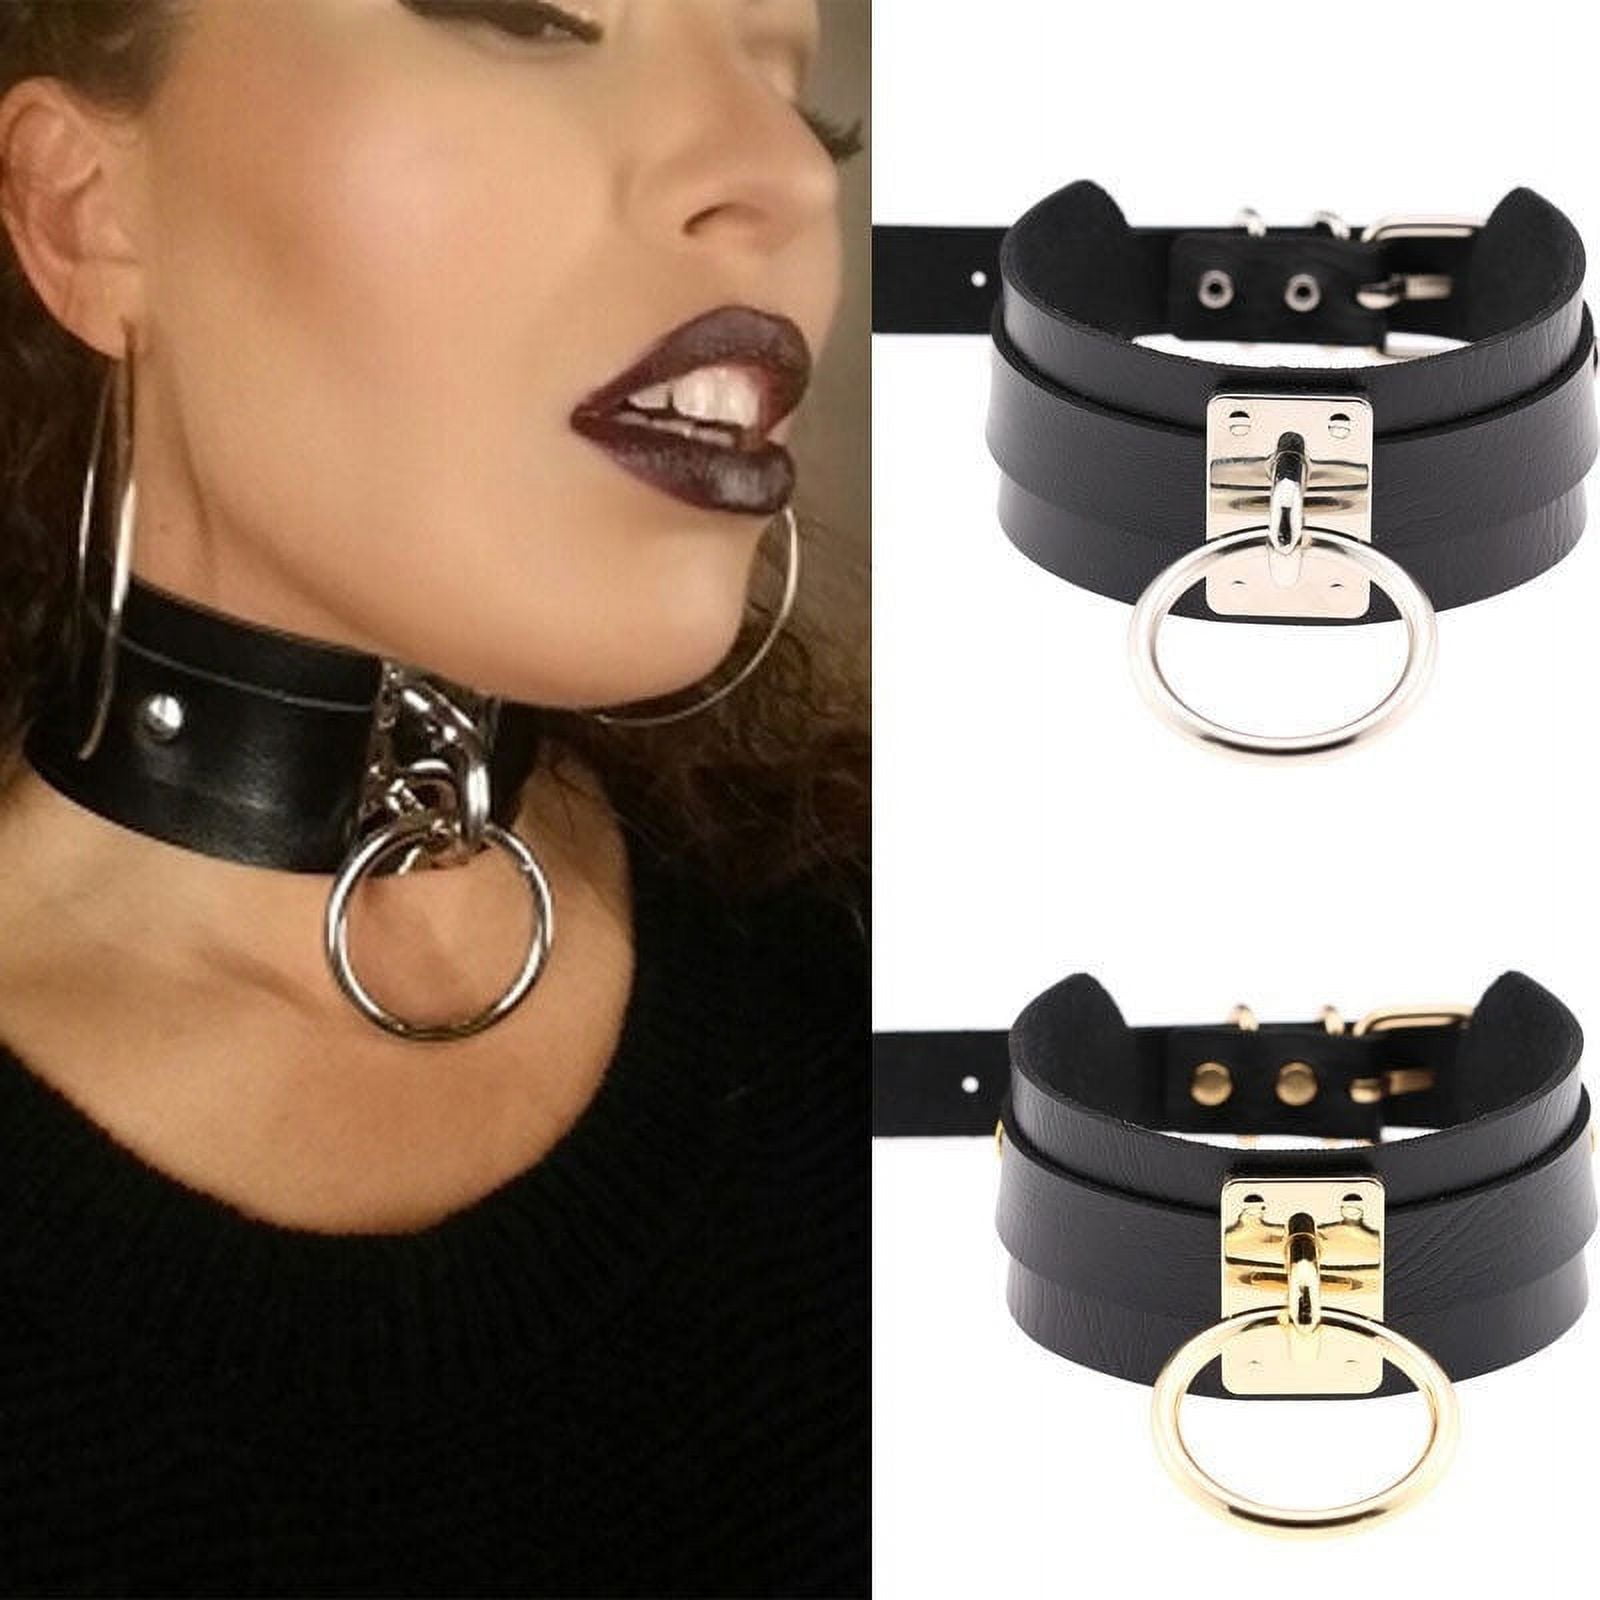 Dropship 6 Pcs Gothic Jewelry-PU Leather Choker Necklace For Women